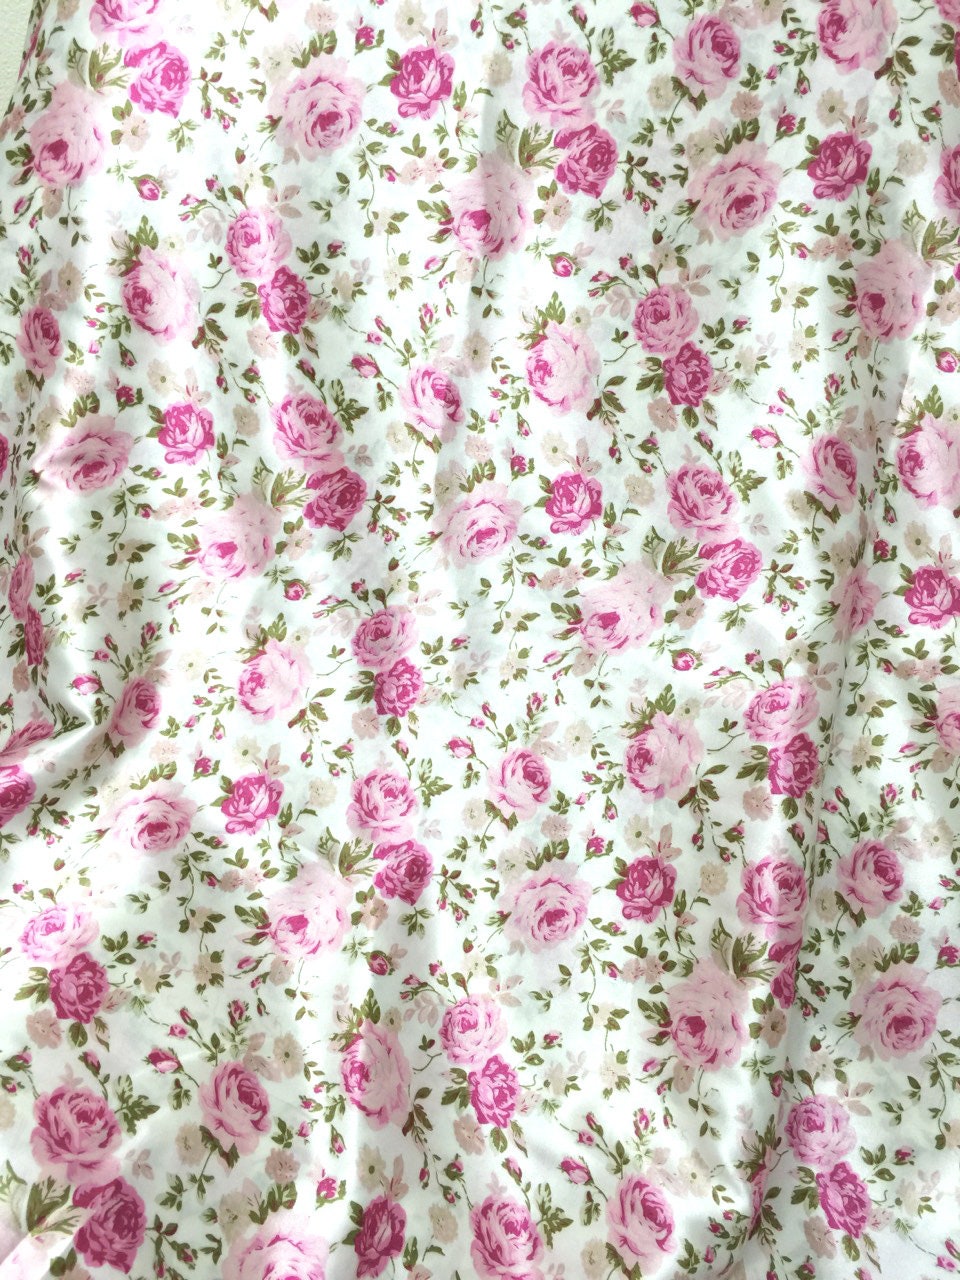 Rose Floral Print Faux Silk Satin Fabric 48w Ivory - Etsy